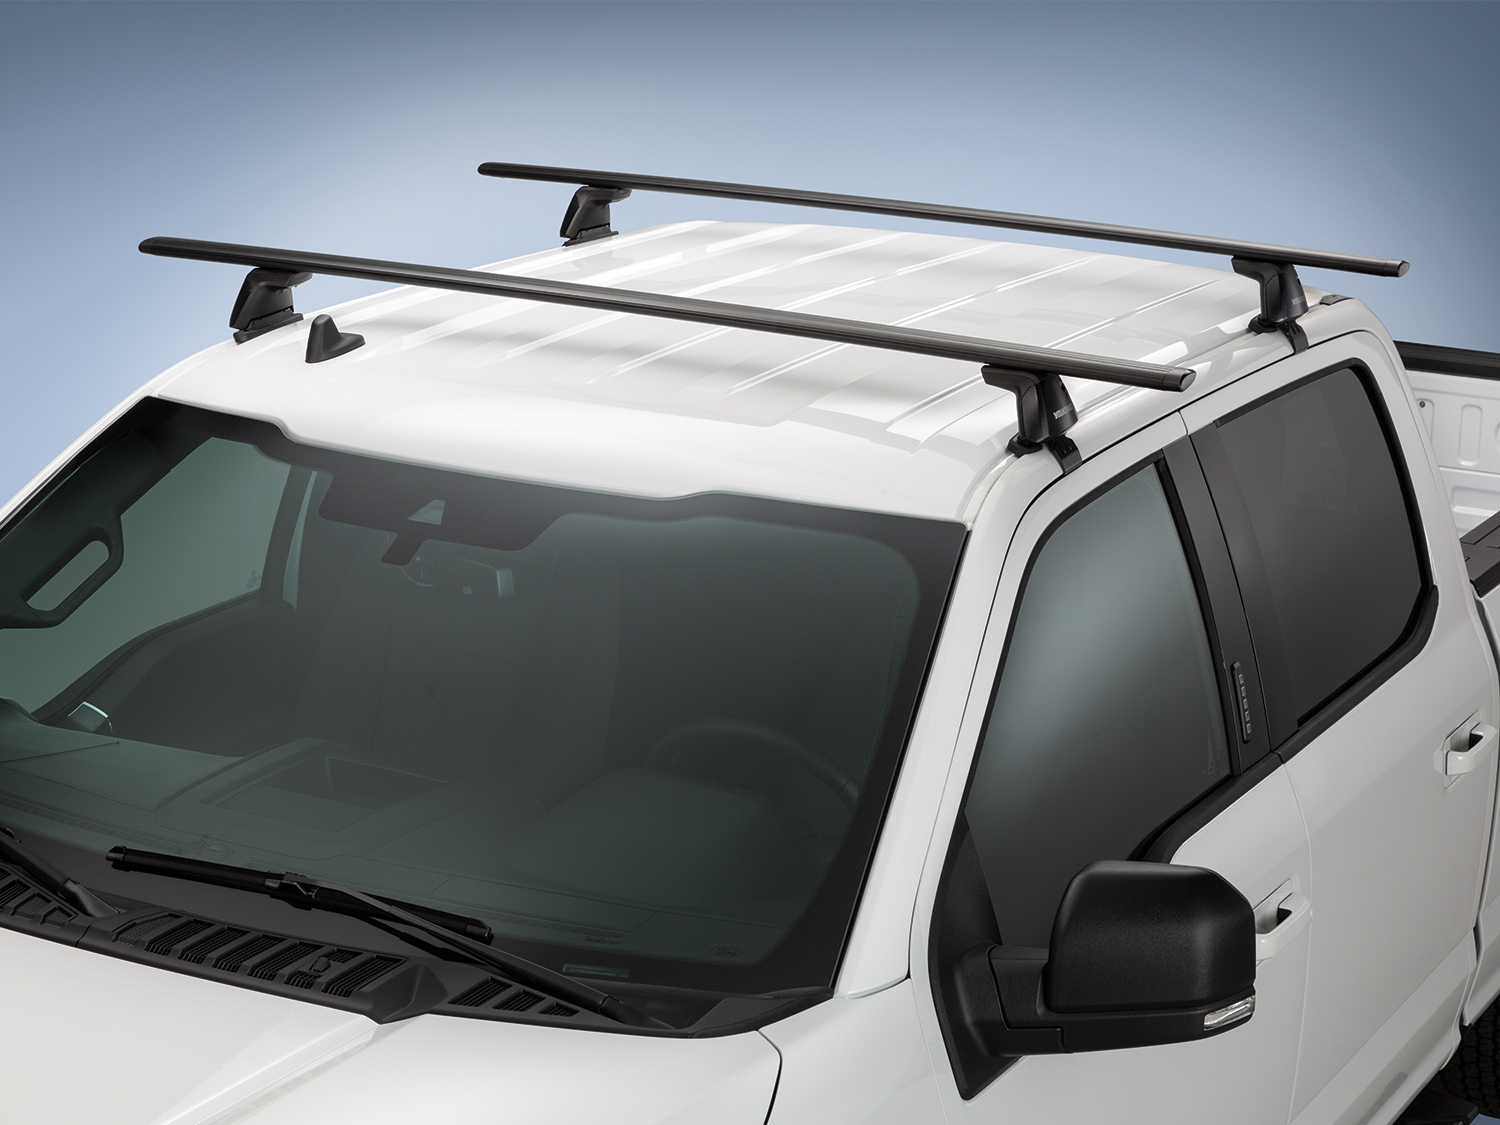 Image for Racks and Carriers by Yakima - Removable Roof Rack and Crossbar System from AccessoriesCanada